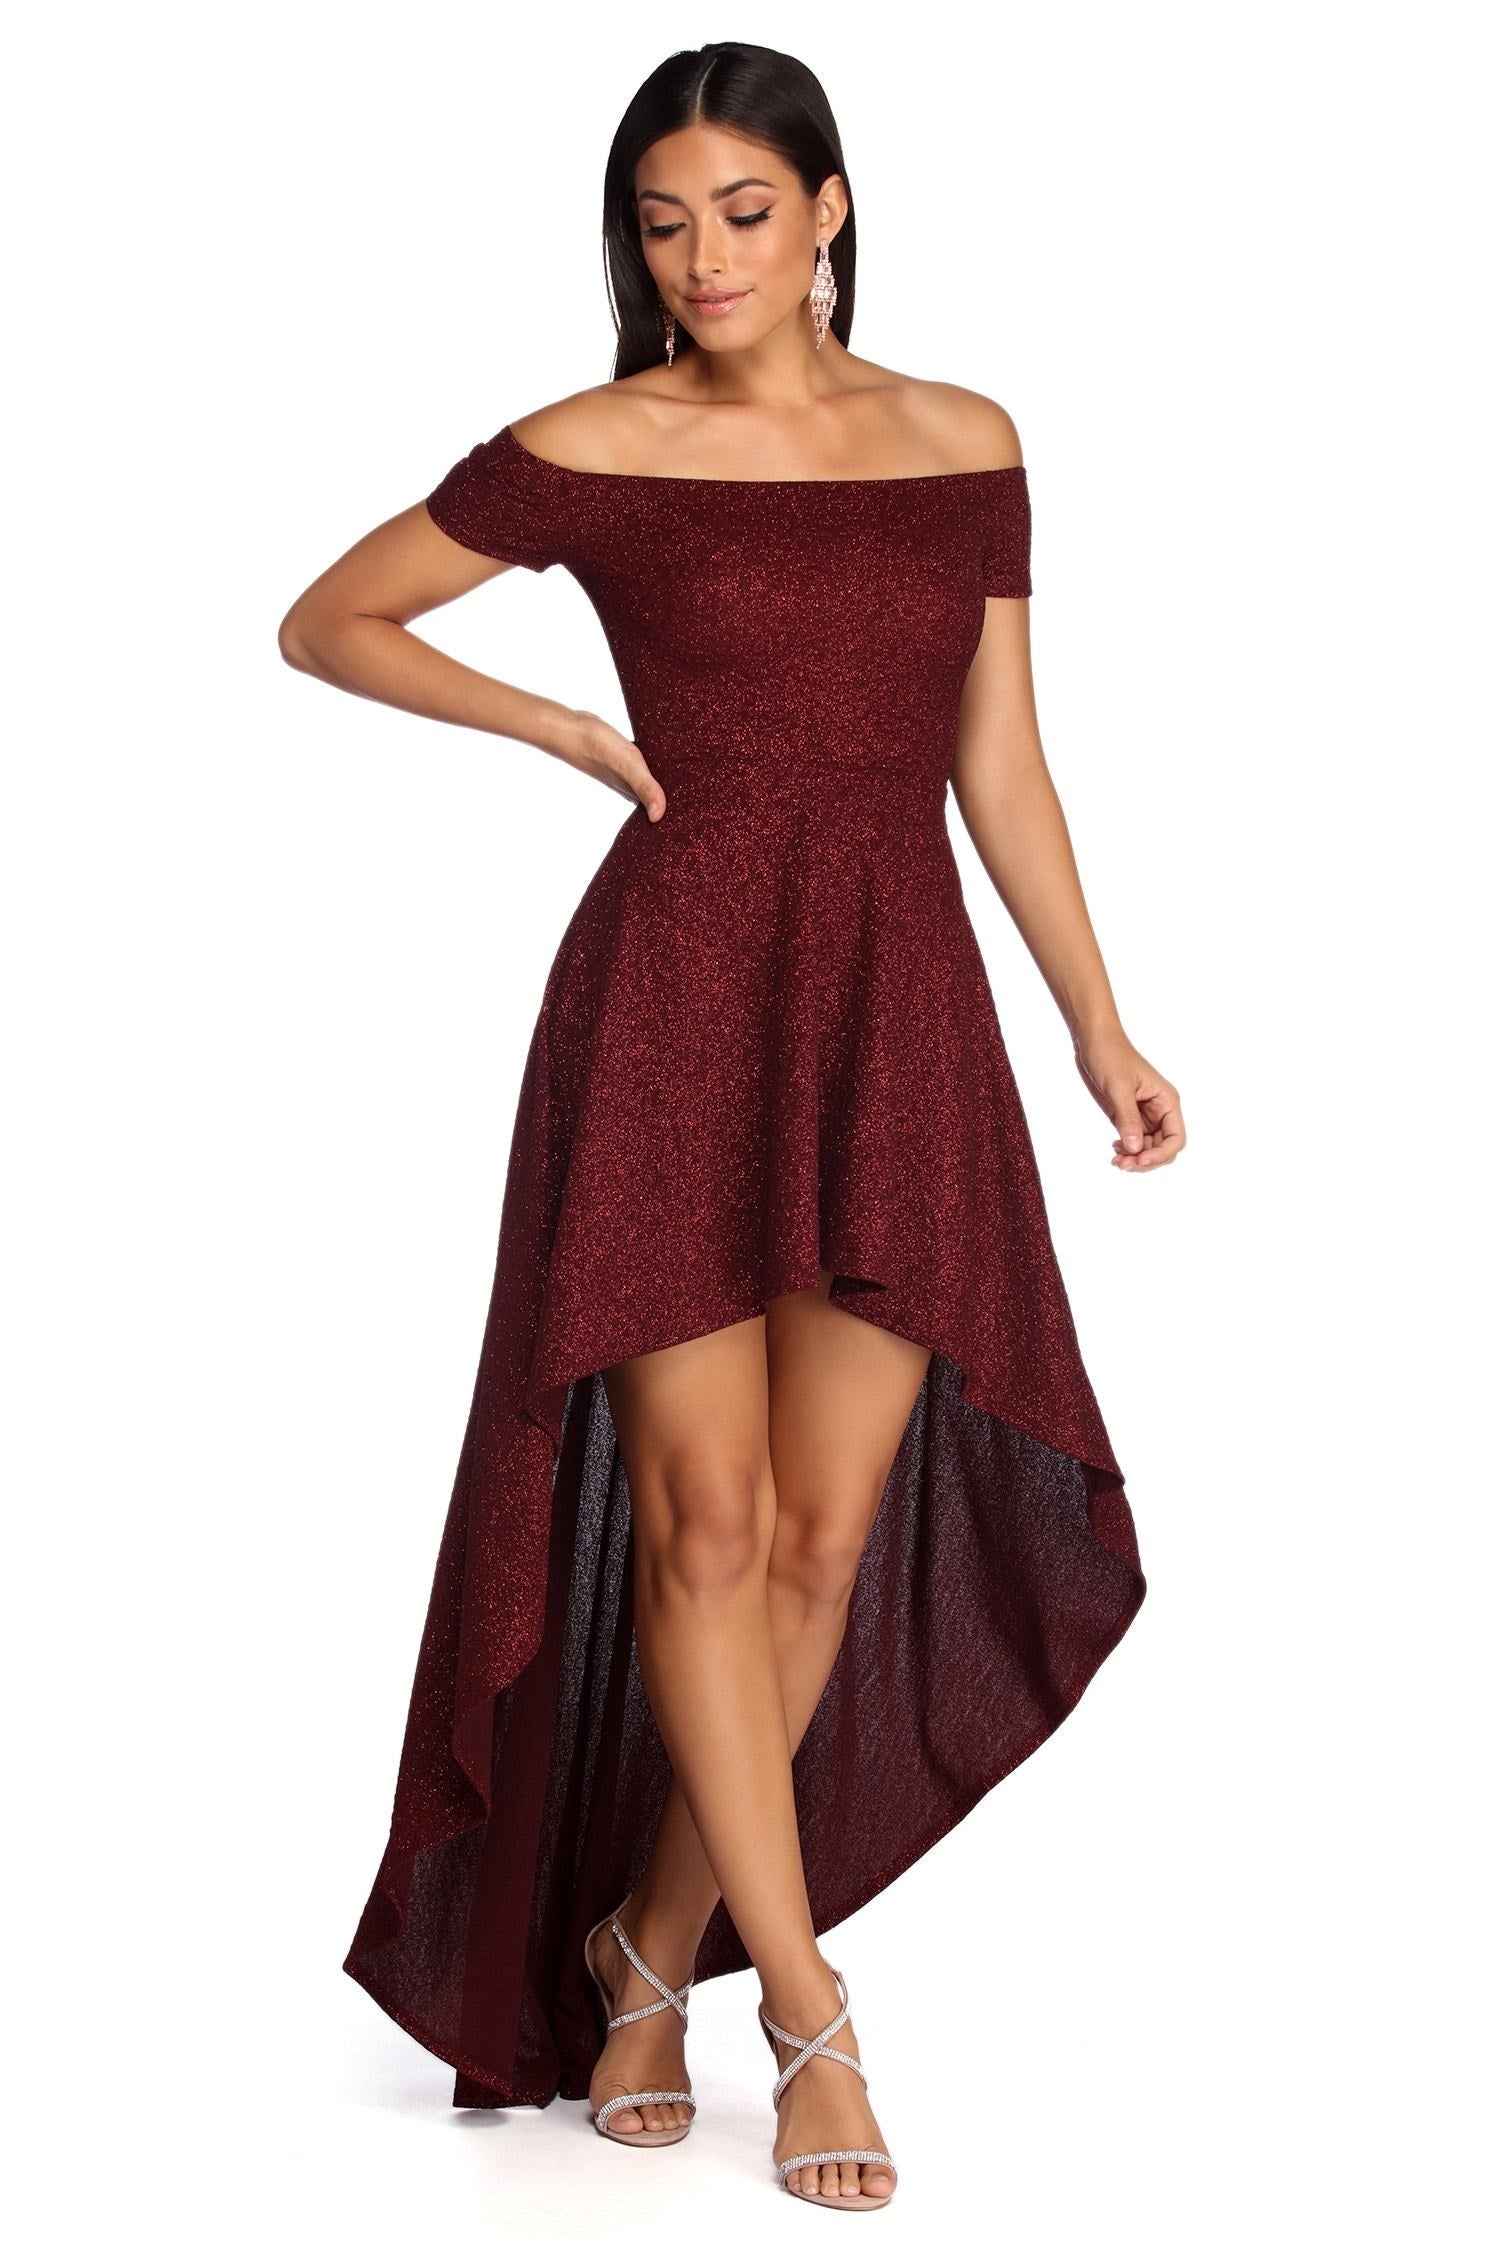 Penelope Glitter Formal High Low Dress - Lady Occasions